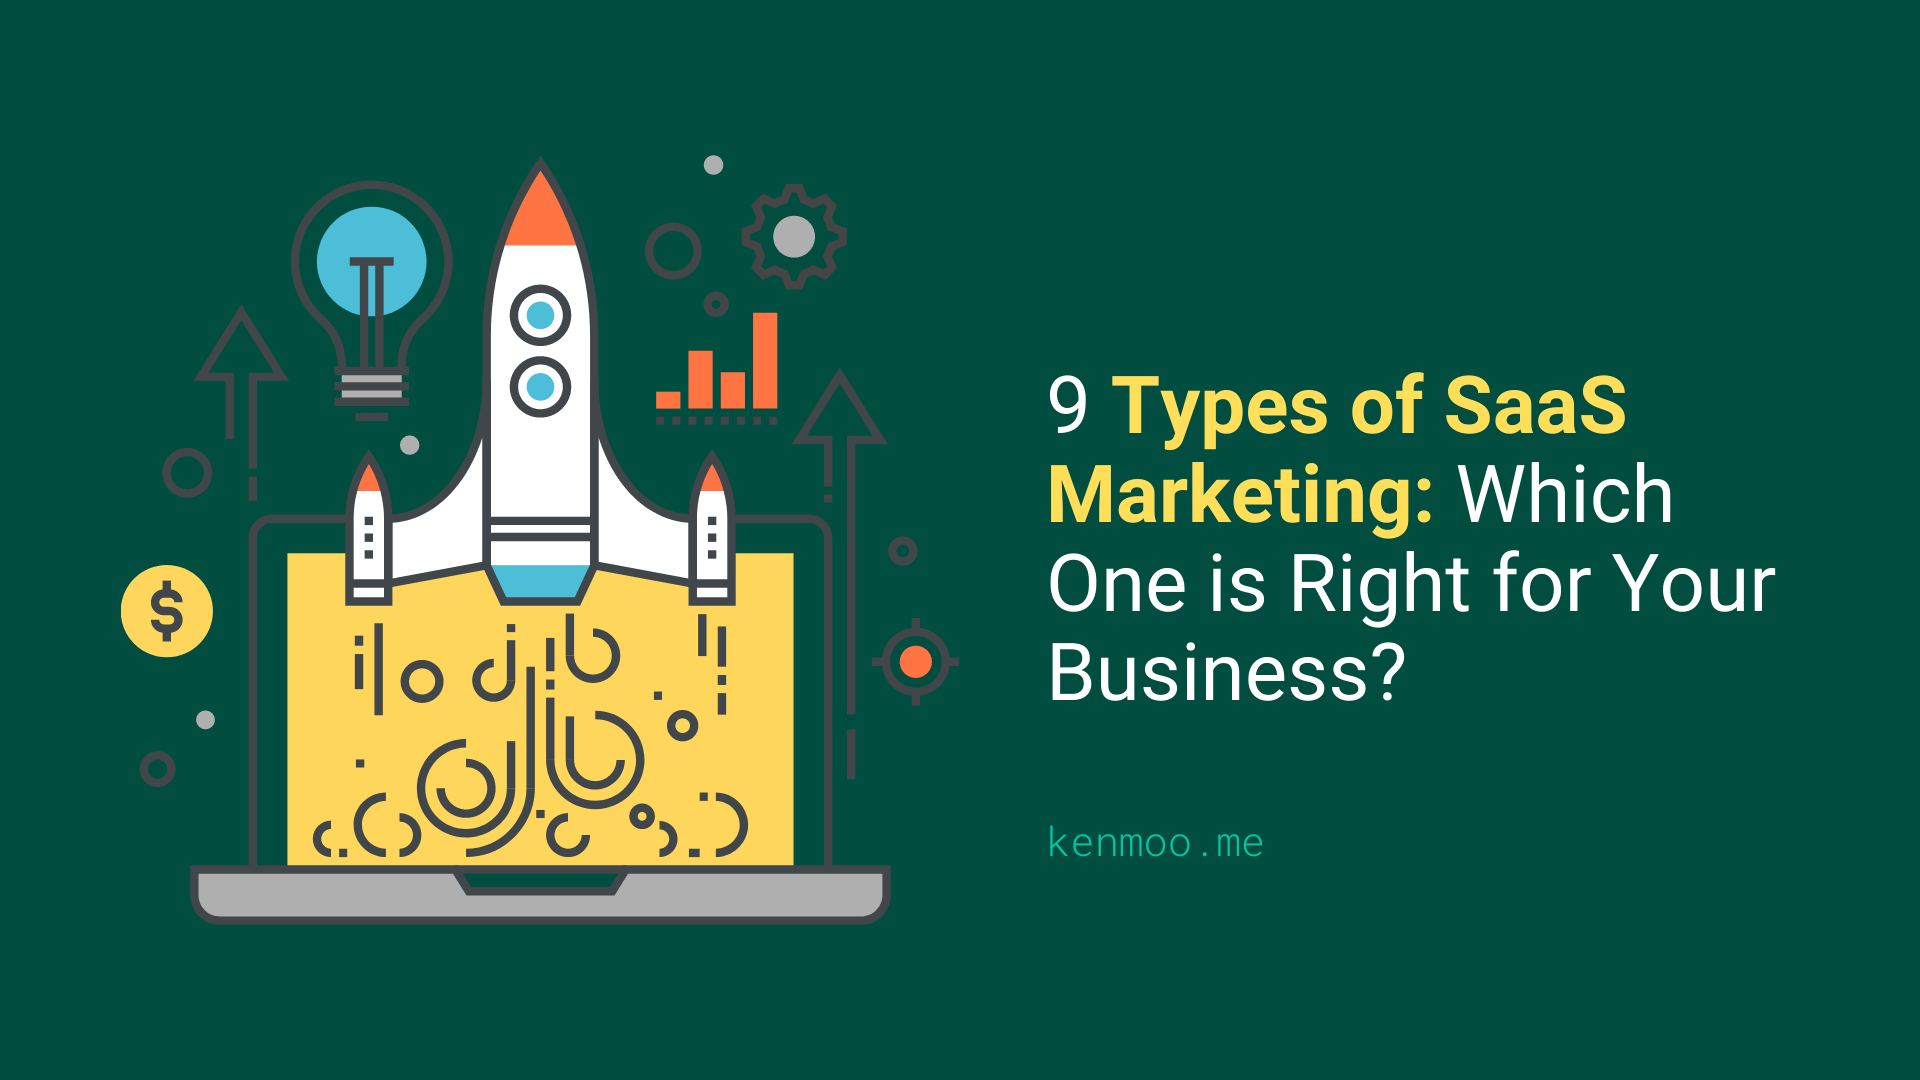 9 Types of SaaS Marketing: Which One is Right for Your Business?